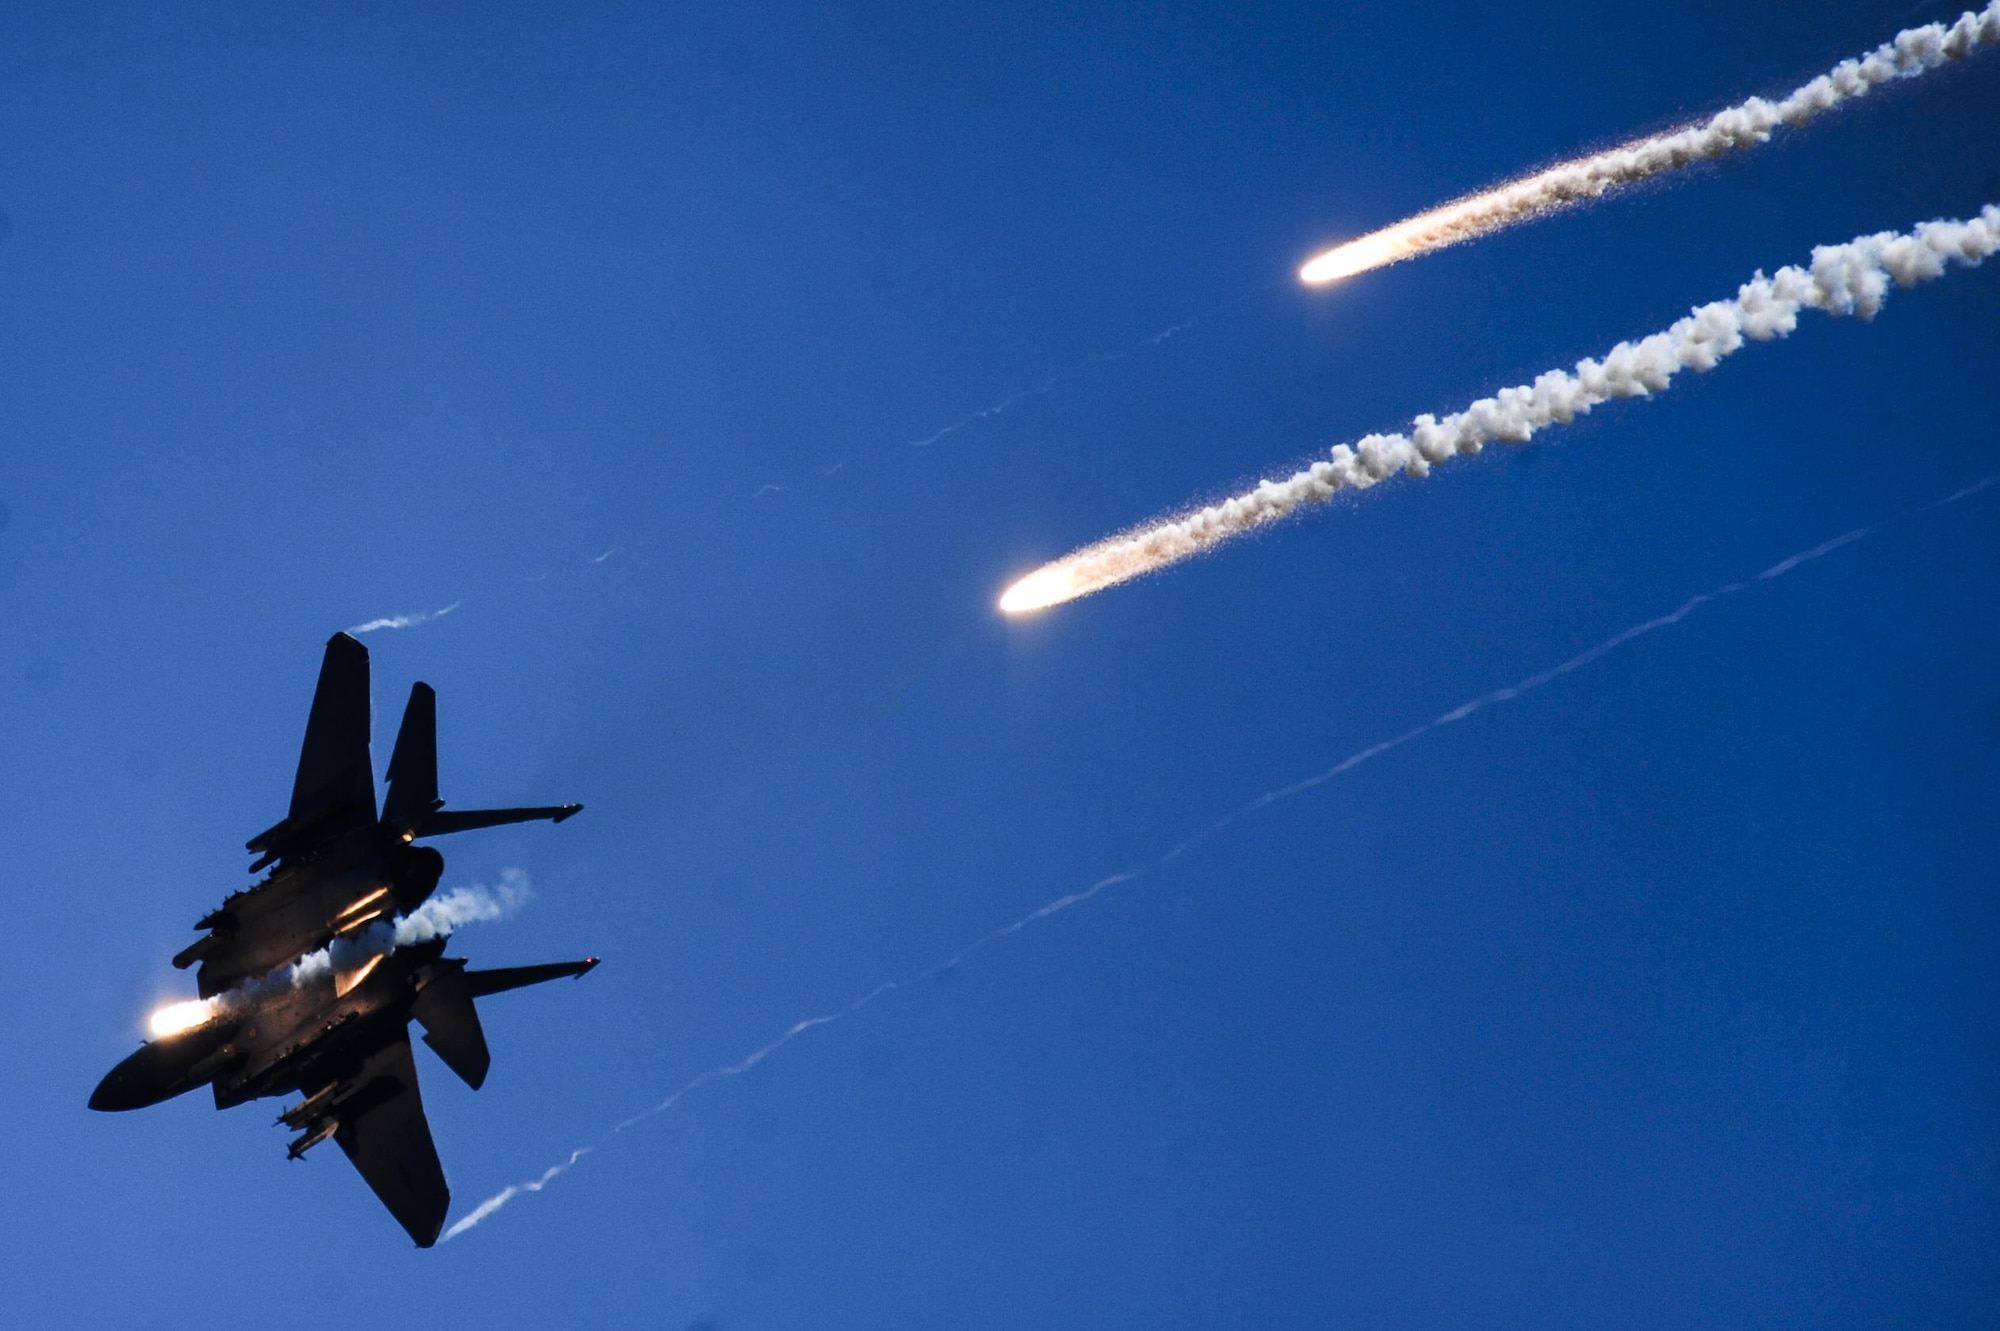 An F-15E Strike Eagle fires multiple flares during a Combined Arms Demonstration as part of the 2015 Wings Over Wayne Air Show, May 17, 2015, at Seymour Johnson Air Force Base, North Carolina. An aerial team of four Strike Eagles and two A-10 Warthogs joined forces to simulate taking over an airfield by eliminating enemy ground forces. (U.S. Air Force photo/Senior Airman Brittain Crolley)